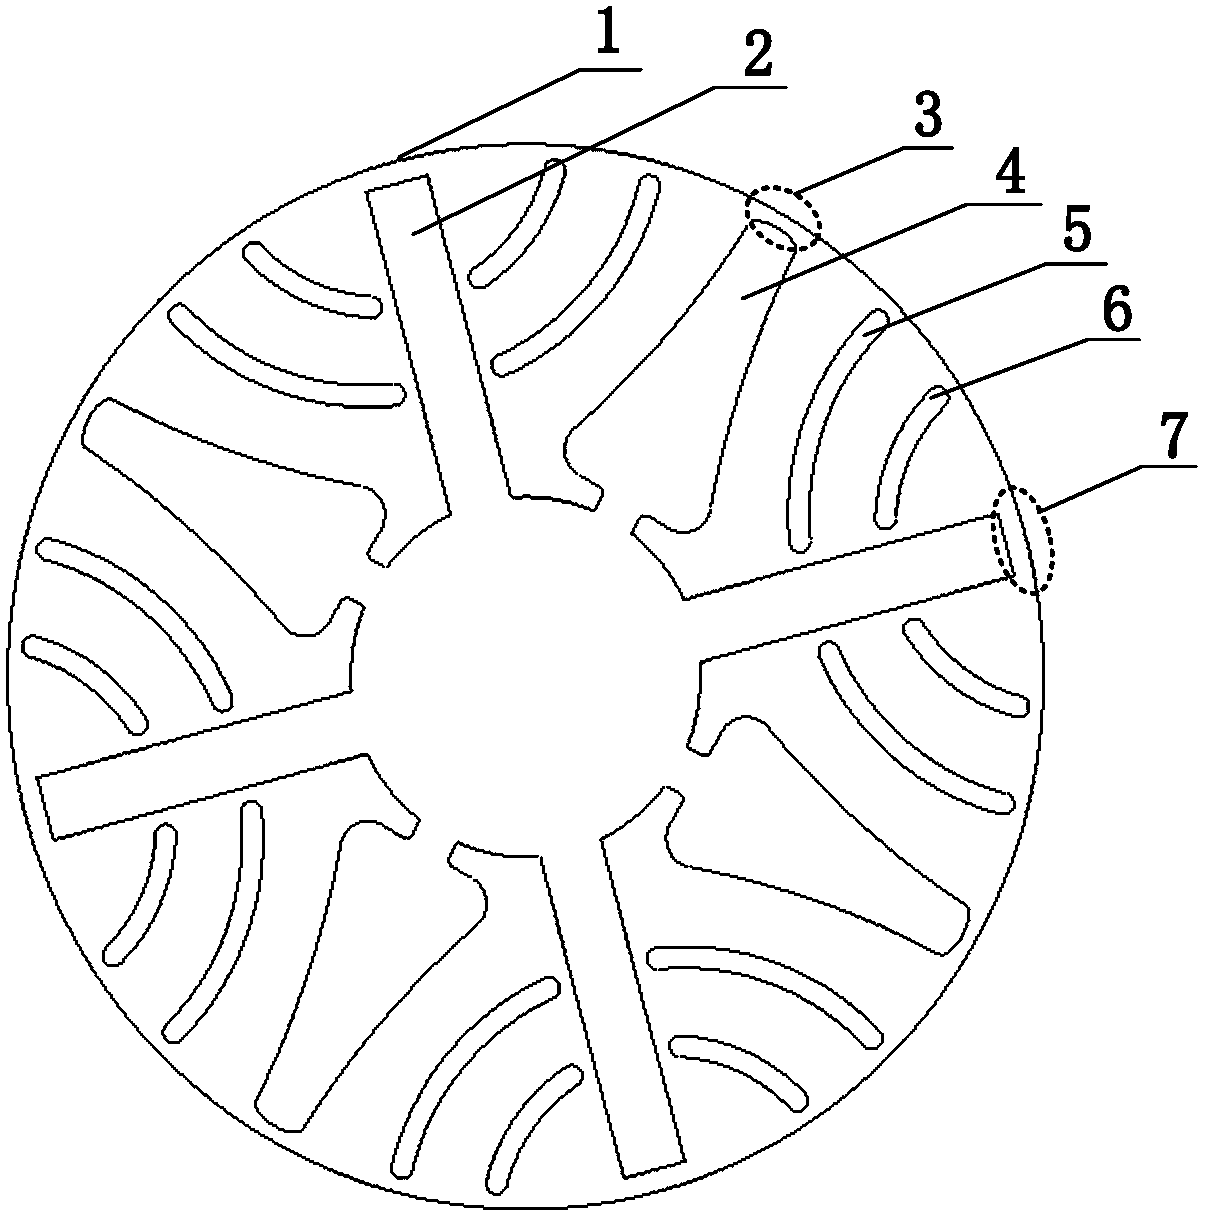 Rotor core of a variable flux permanent magnet synchronous motor